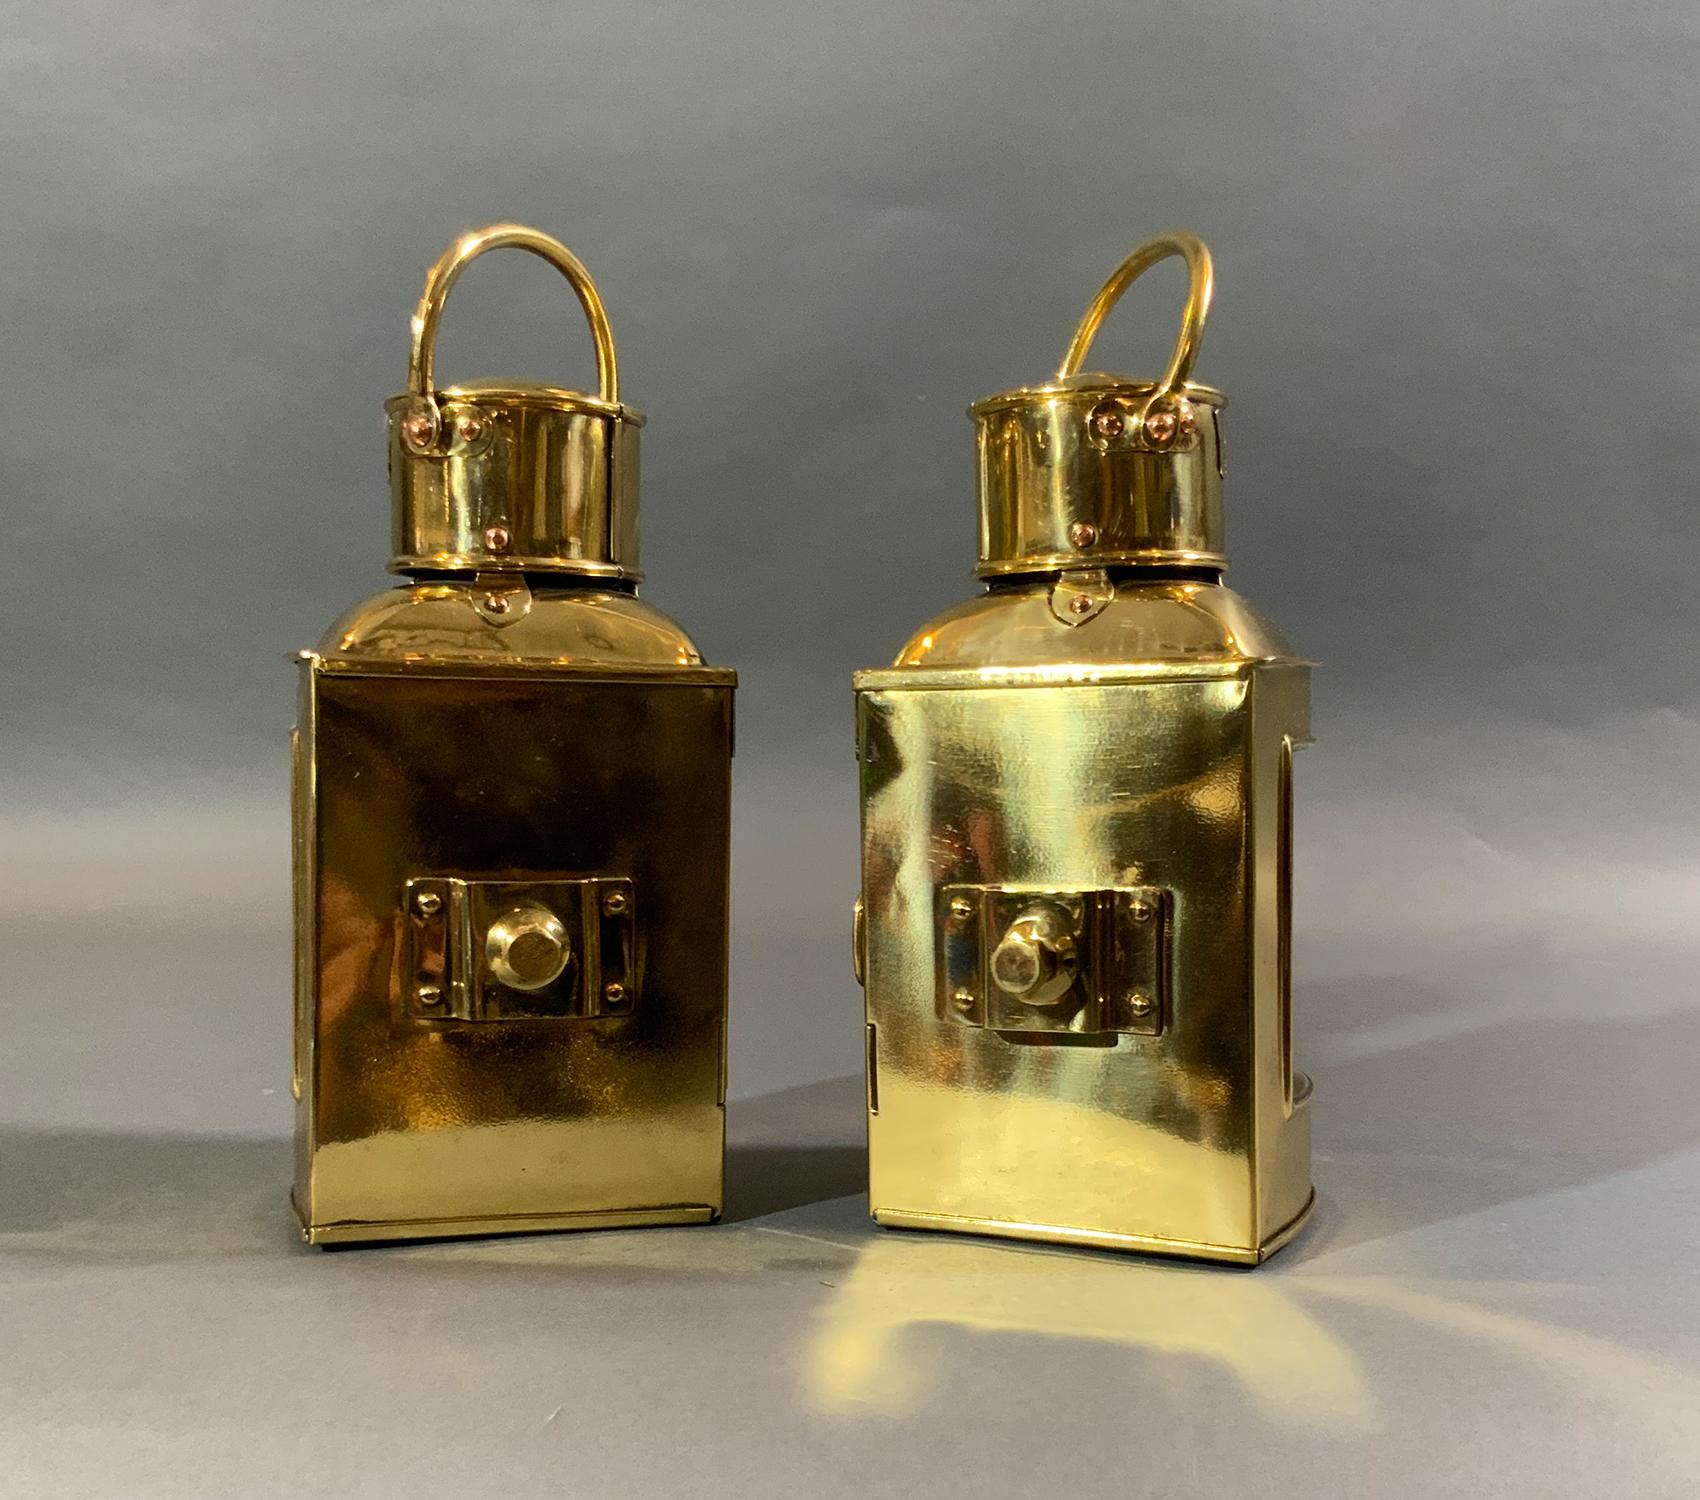 European Solid Brass Port and Starboard Boat Lanterns For Sale